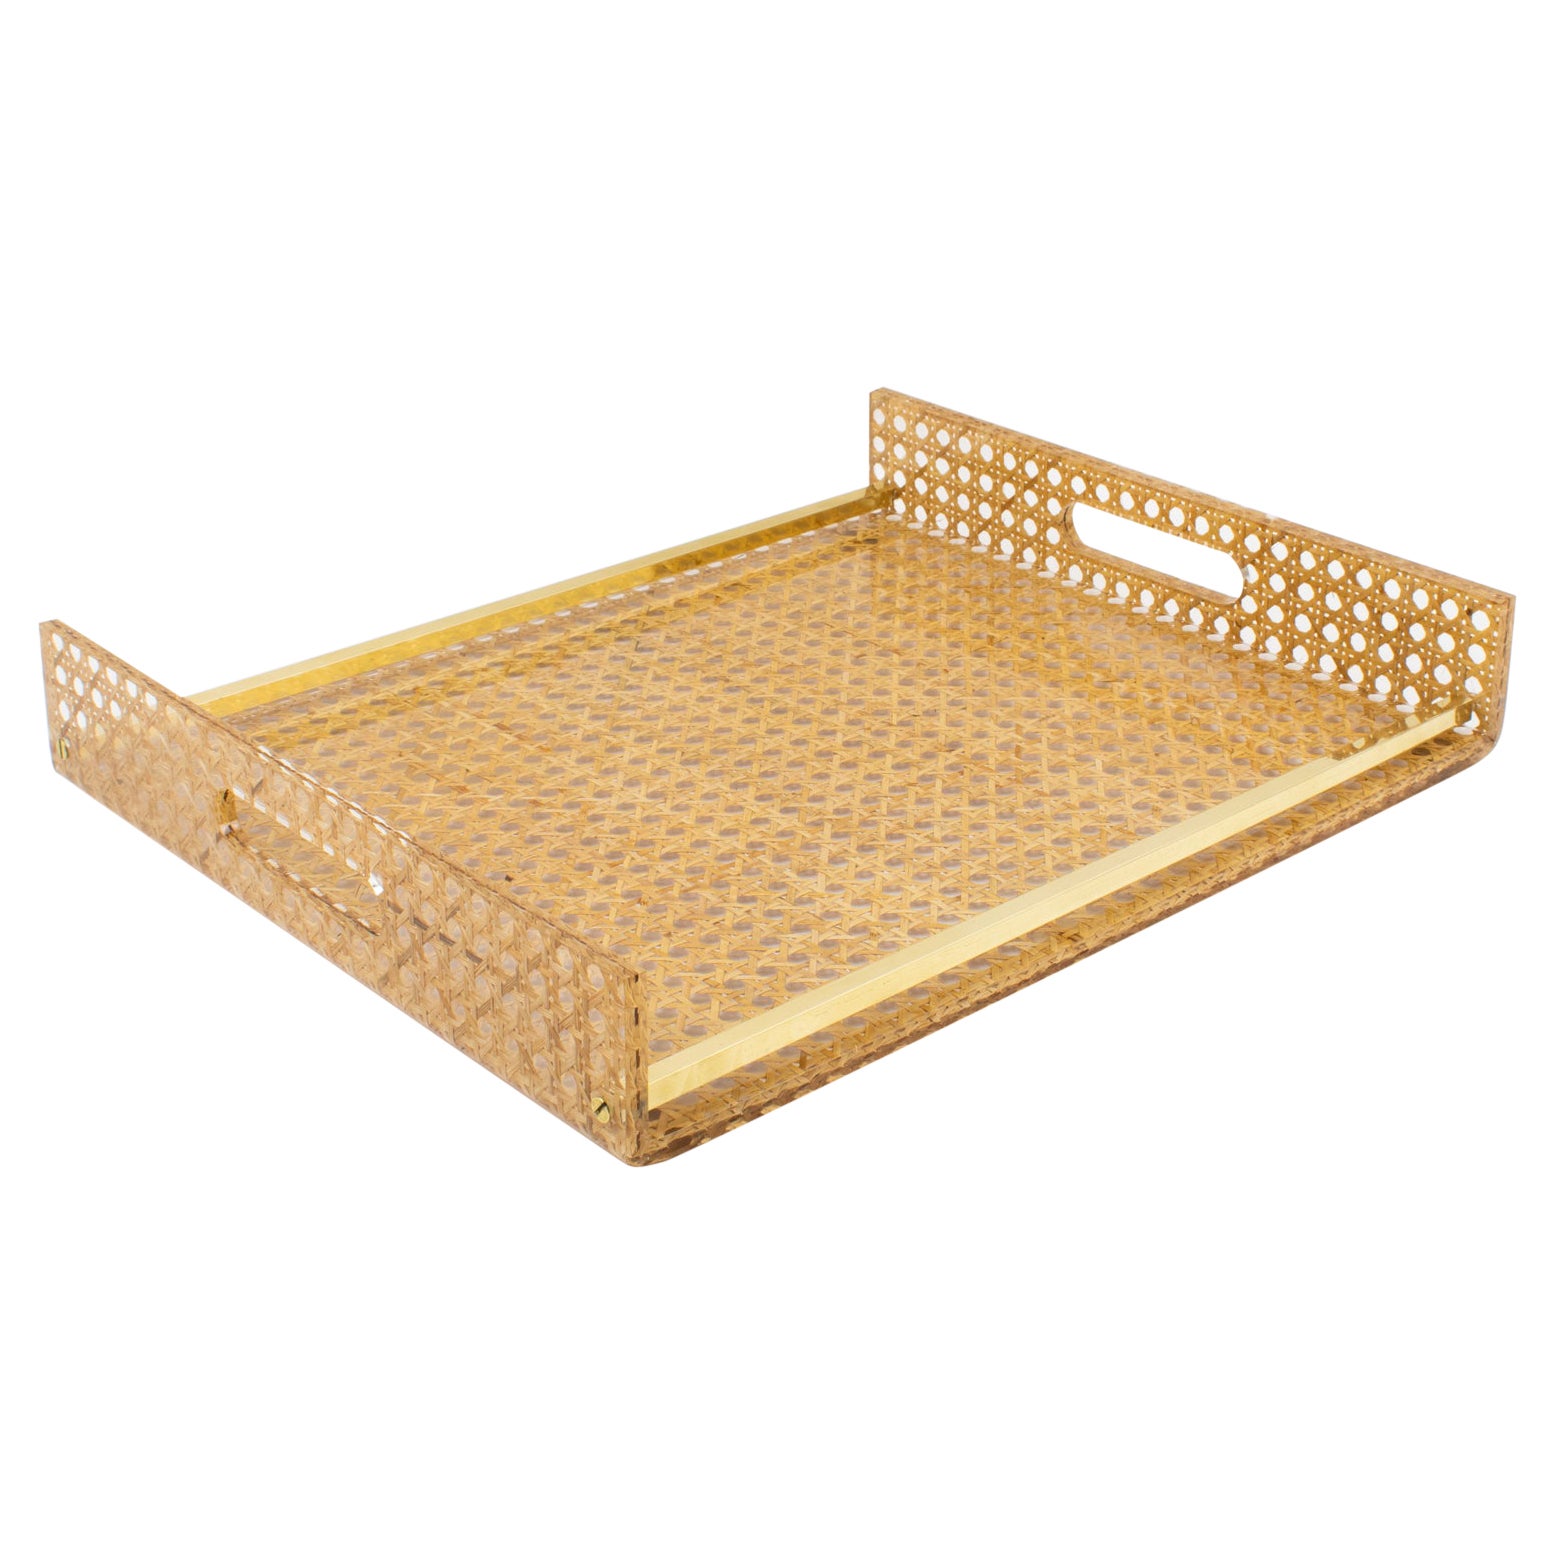 Christian Dior Lucite Rattan and Brass Barware Serving Tray, 1970s